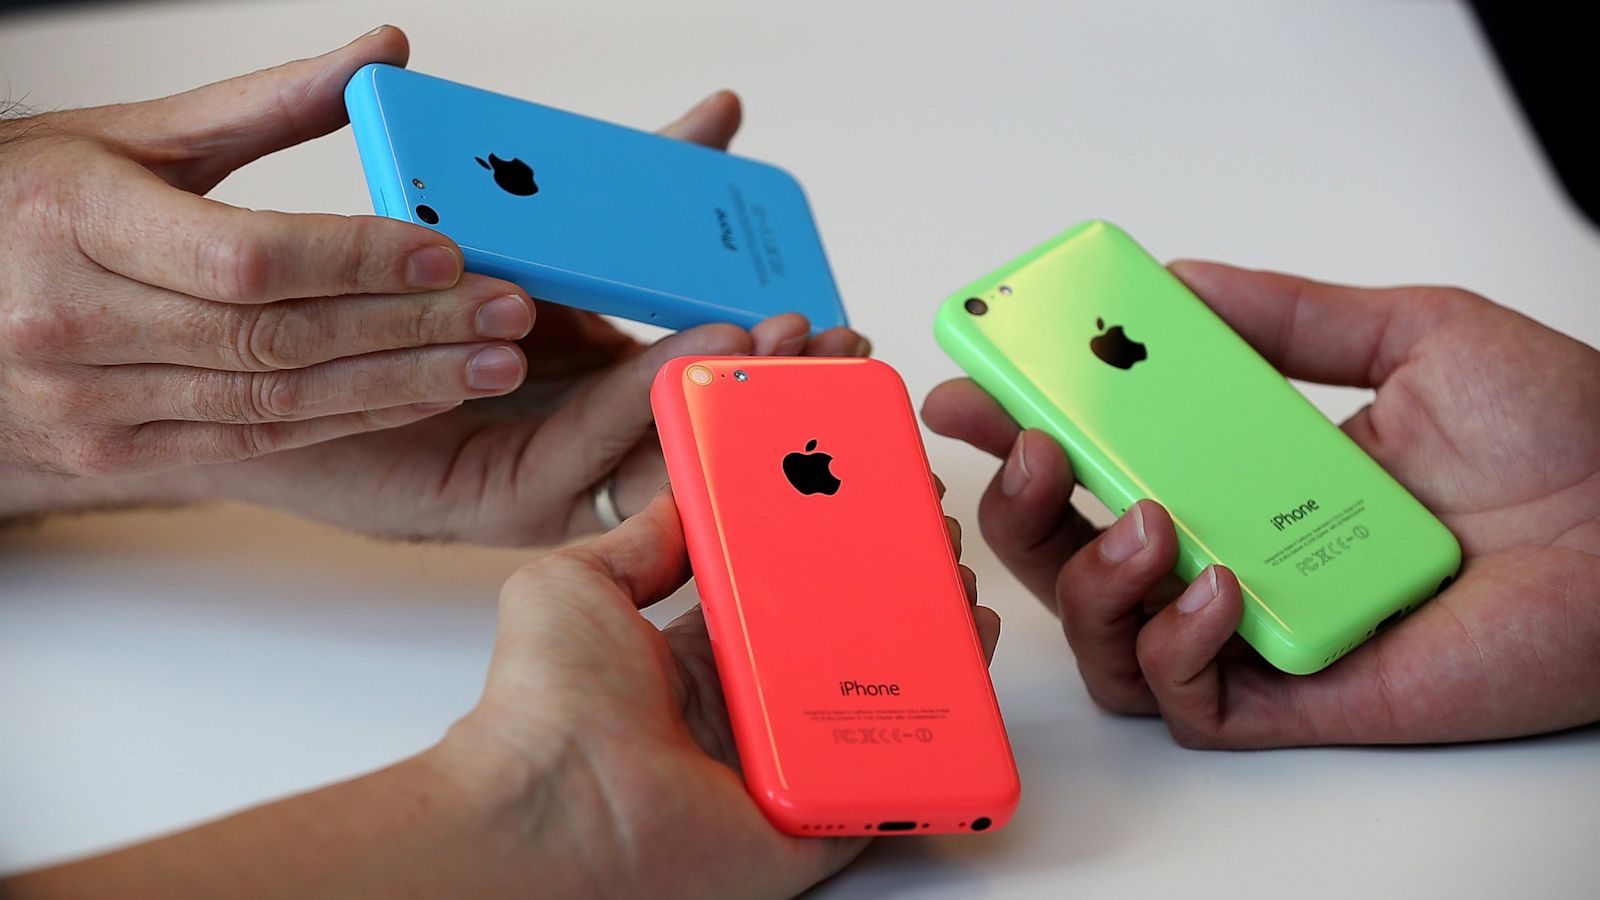 Two Weeks After Launch, Walmart Drops Price of the iPhone 5c to